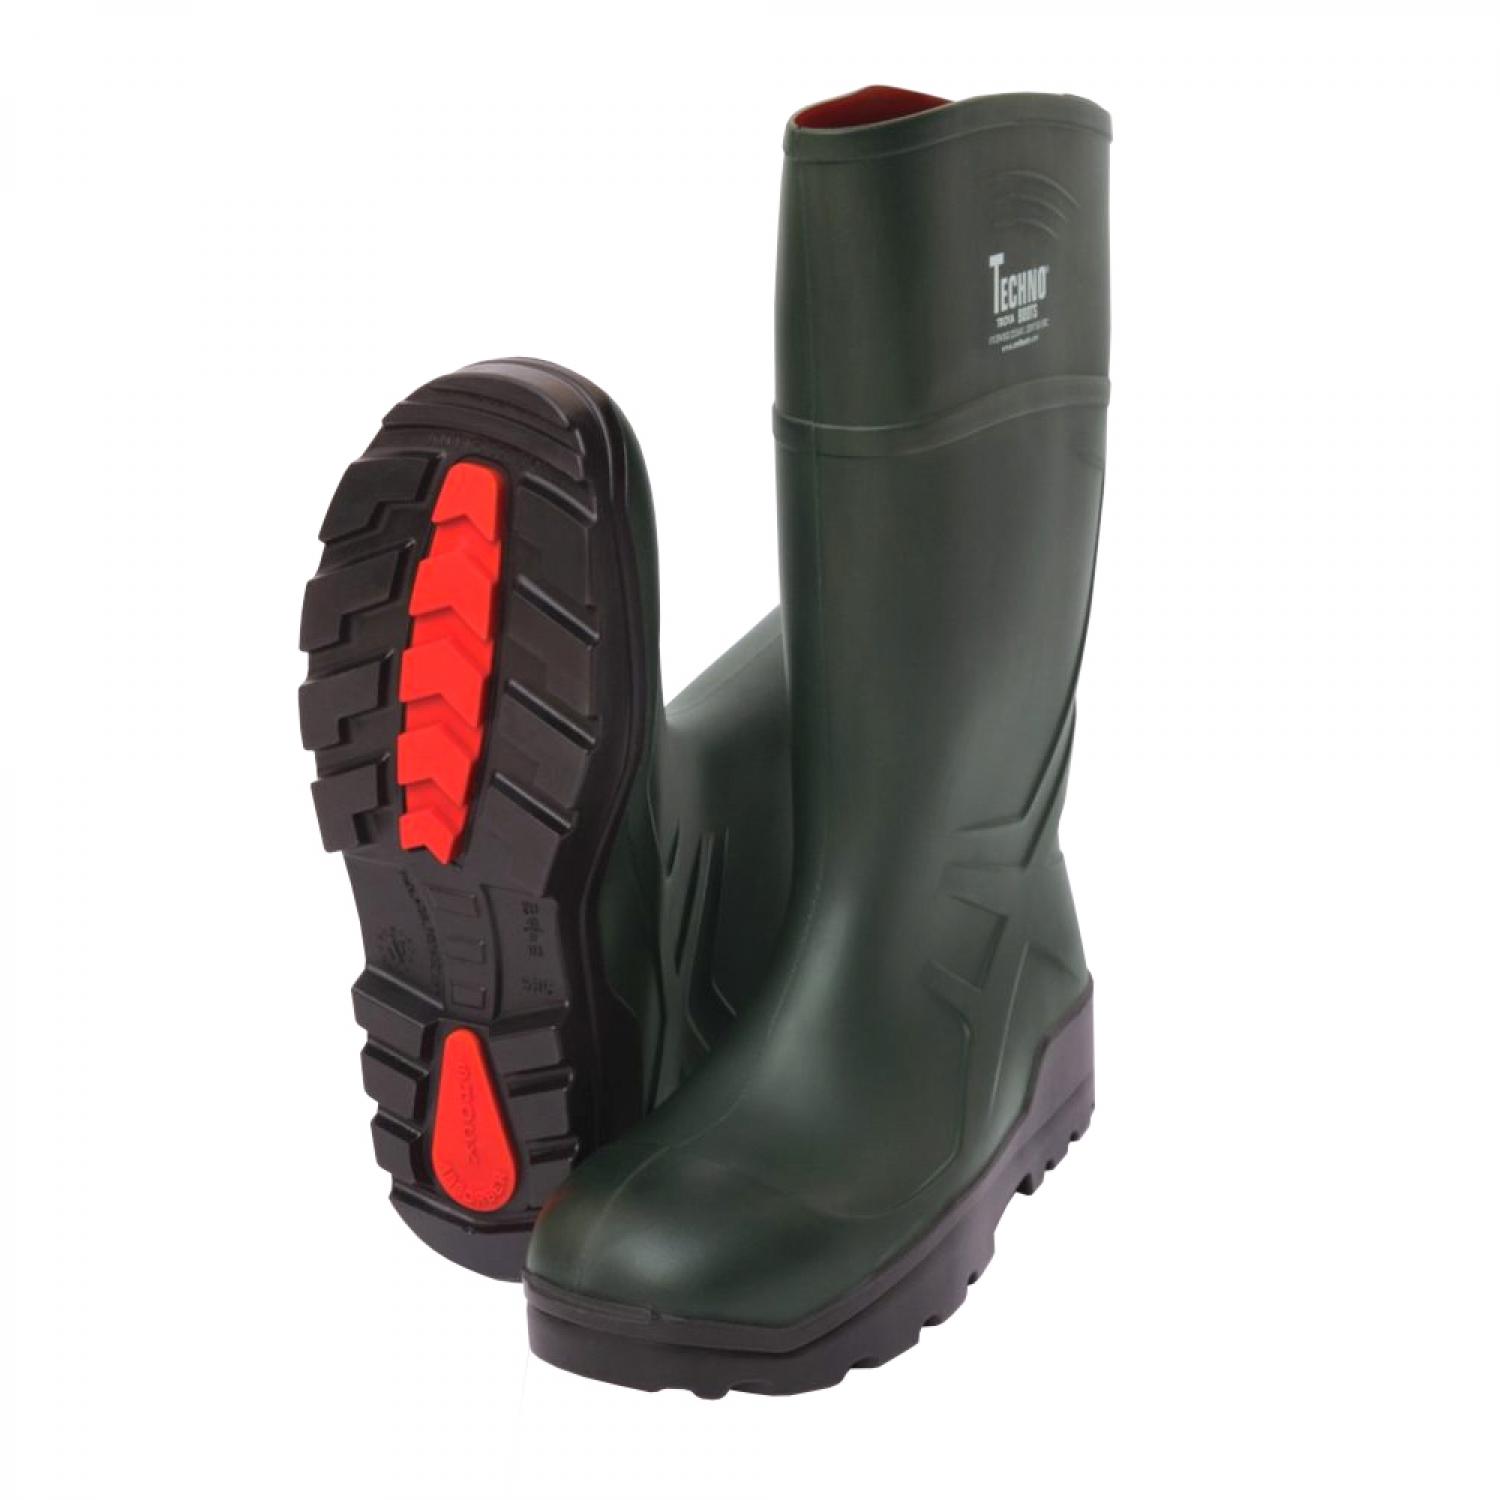 Troya Techno Wellingtons Non Safety<p>Offer superior comfort all day long su... 